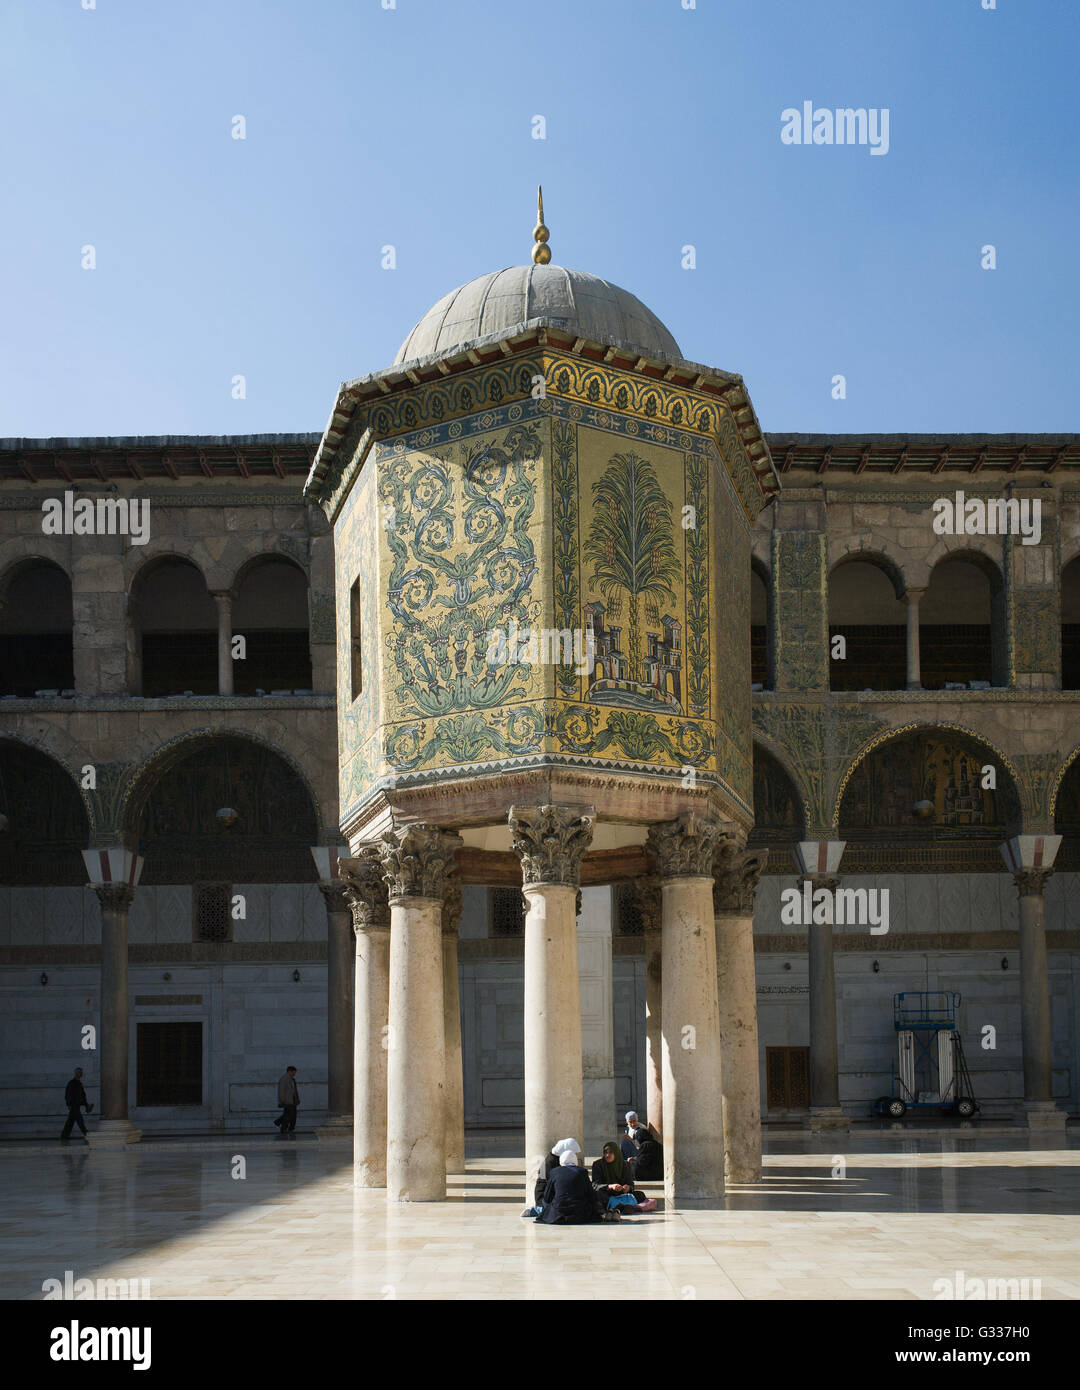 The Dome of the Treasury. Umayyad Mosque in Damascus Stock Photo